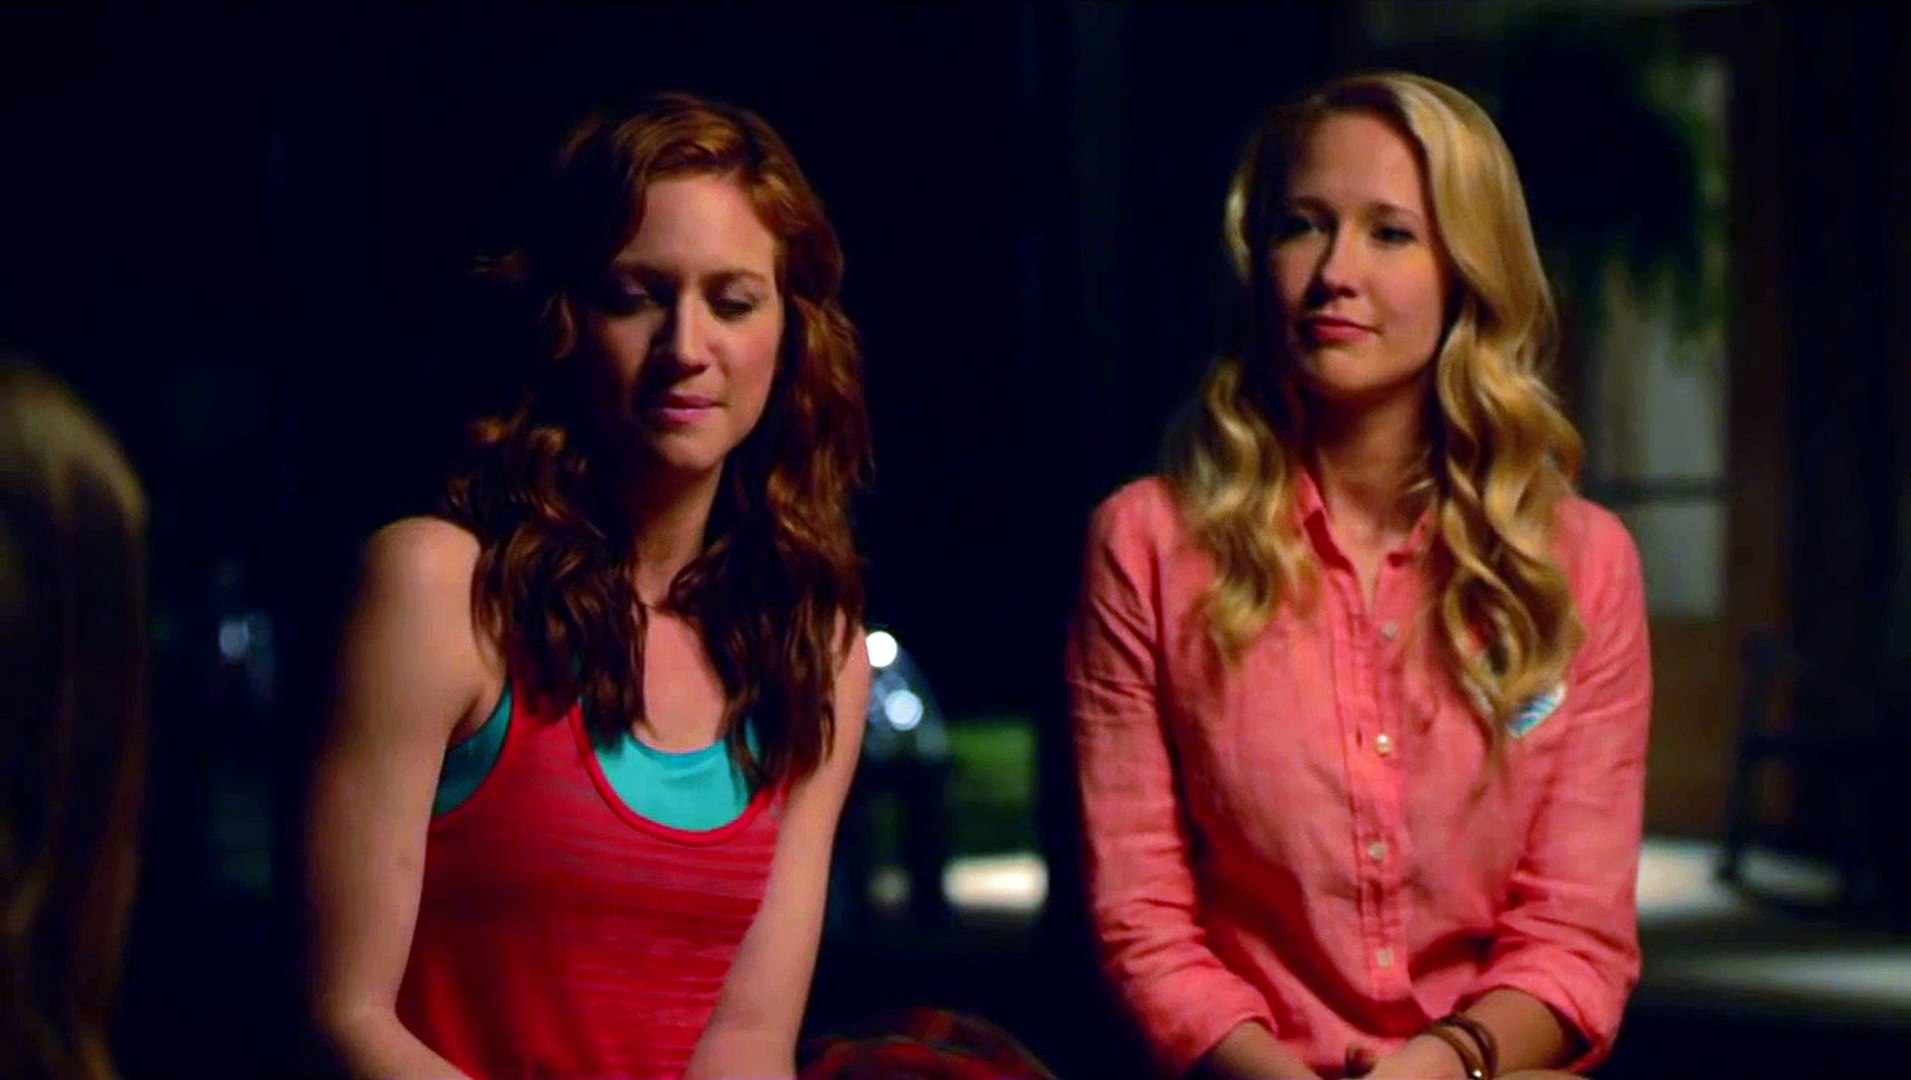 CUPS song around the Campfire" PITCH PERFECT 2 Movie Clip - Dailymotion  Video